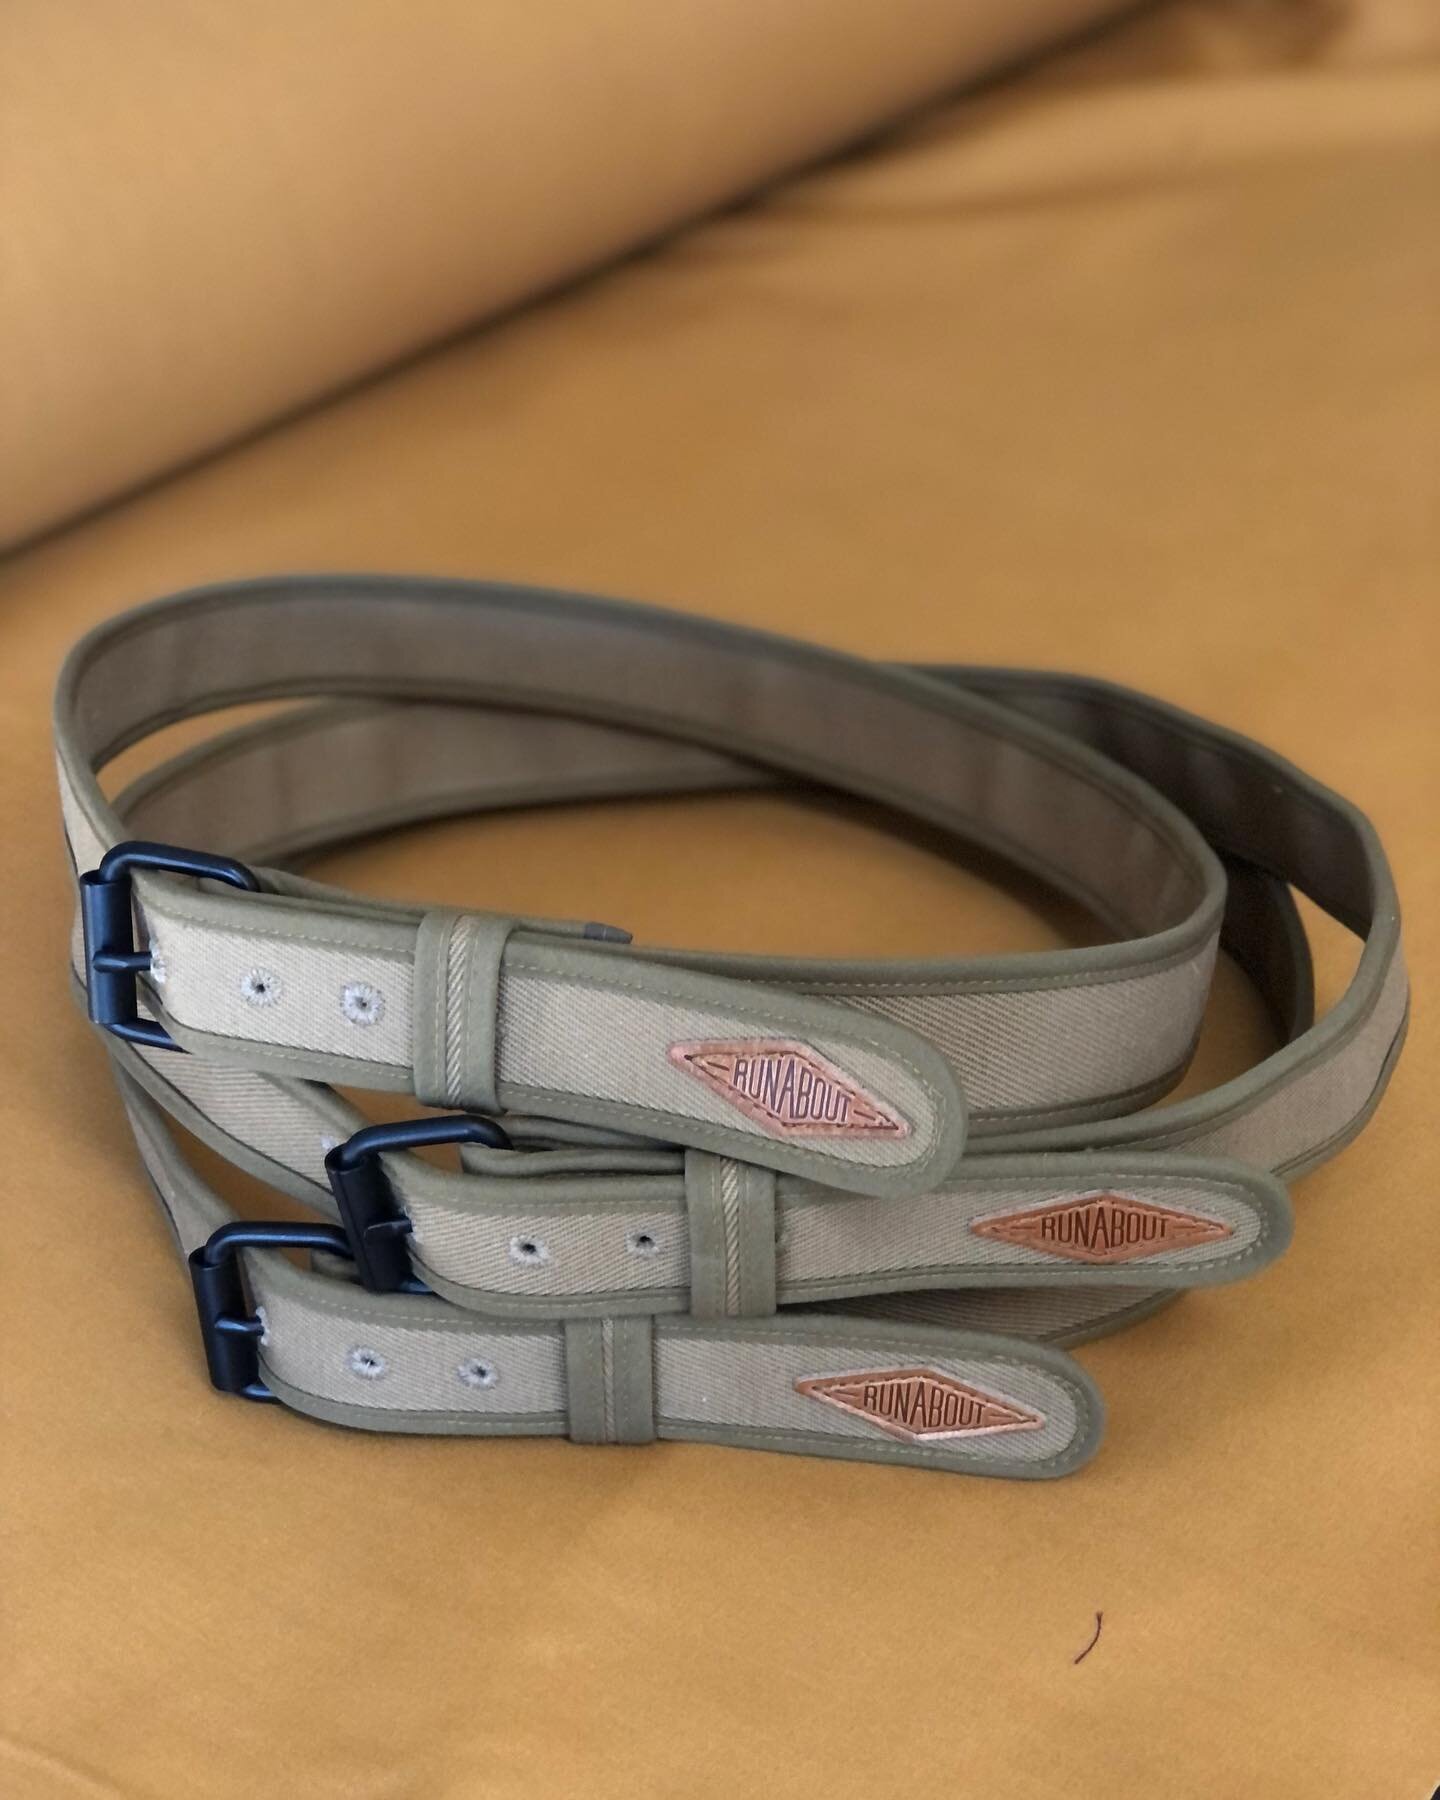 Our Utility Belt belt has just been restocked in all sizes. This beauty is made of 3 ply 18oz. heavy canvas and trimmed with a heavier 7oz. 100% waxed cotton binding than our previous release, for a longer lasting wear life. The roller buckles and sn